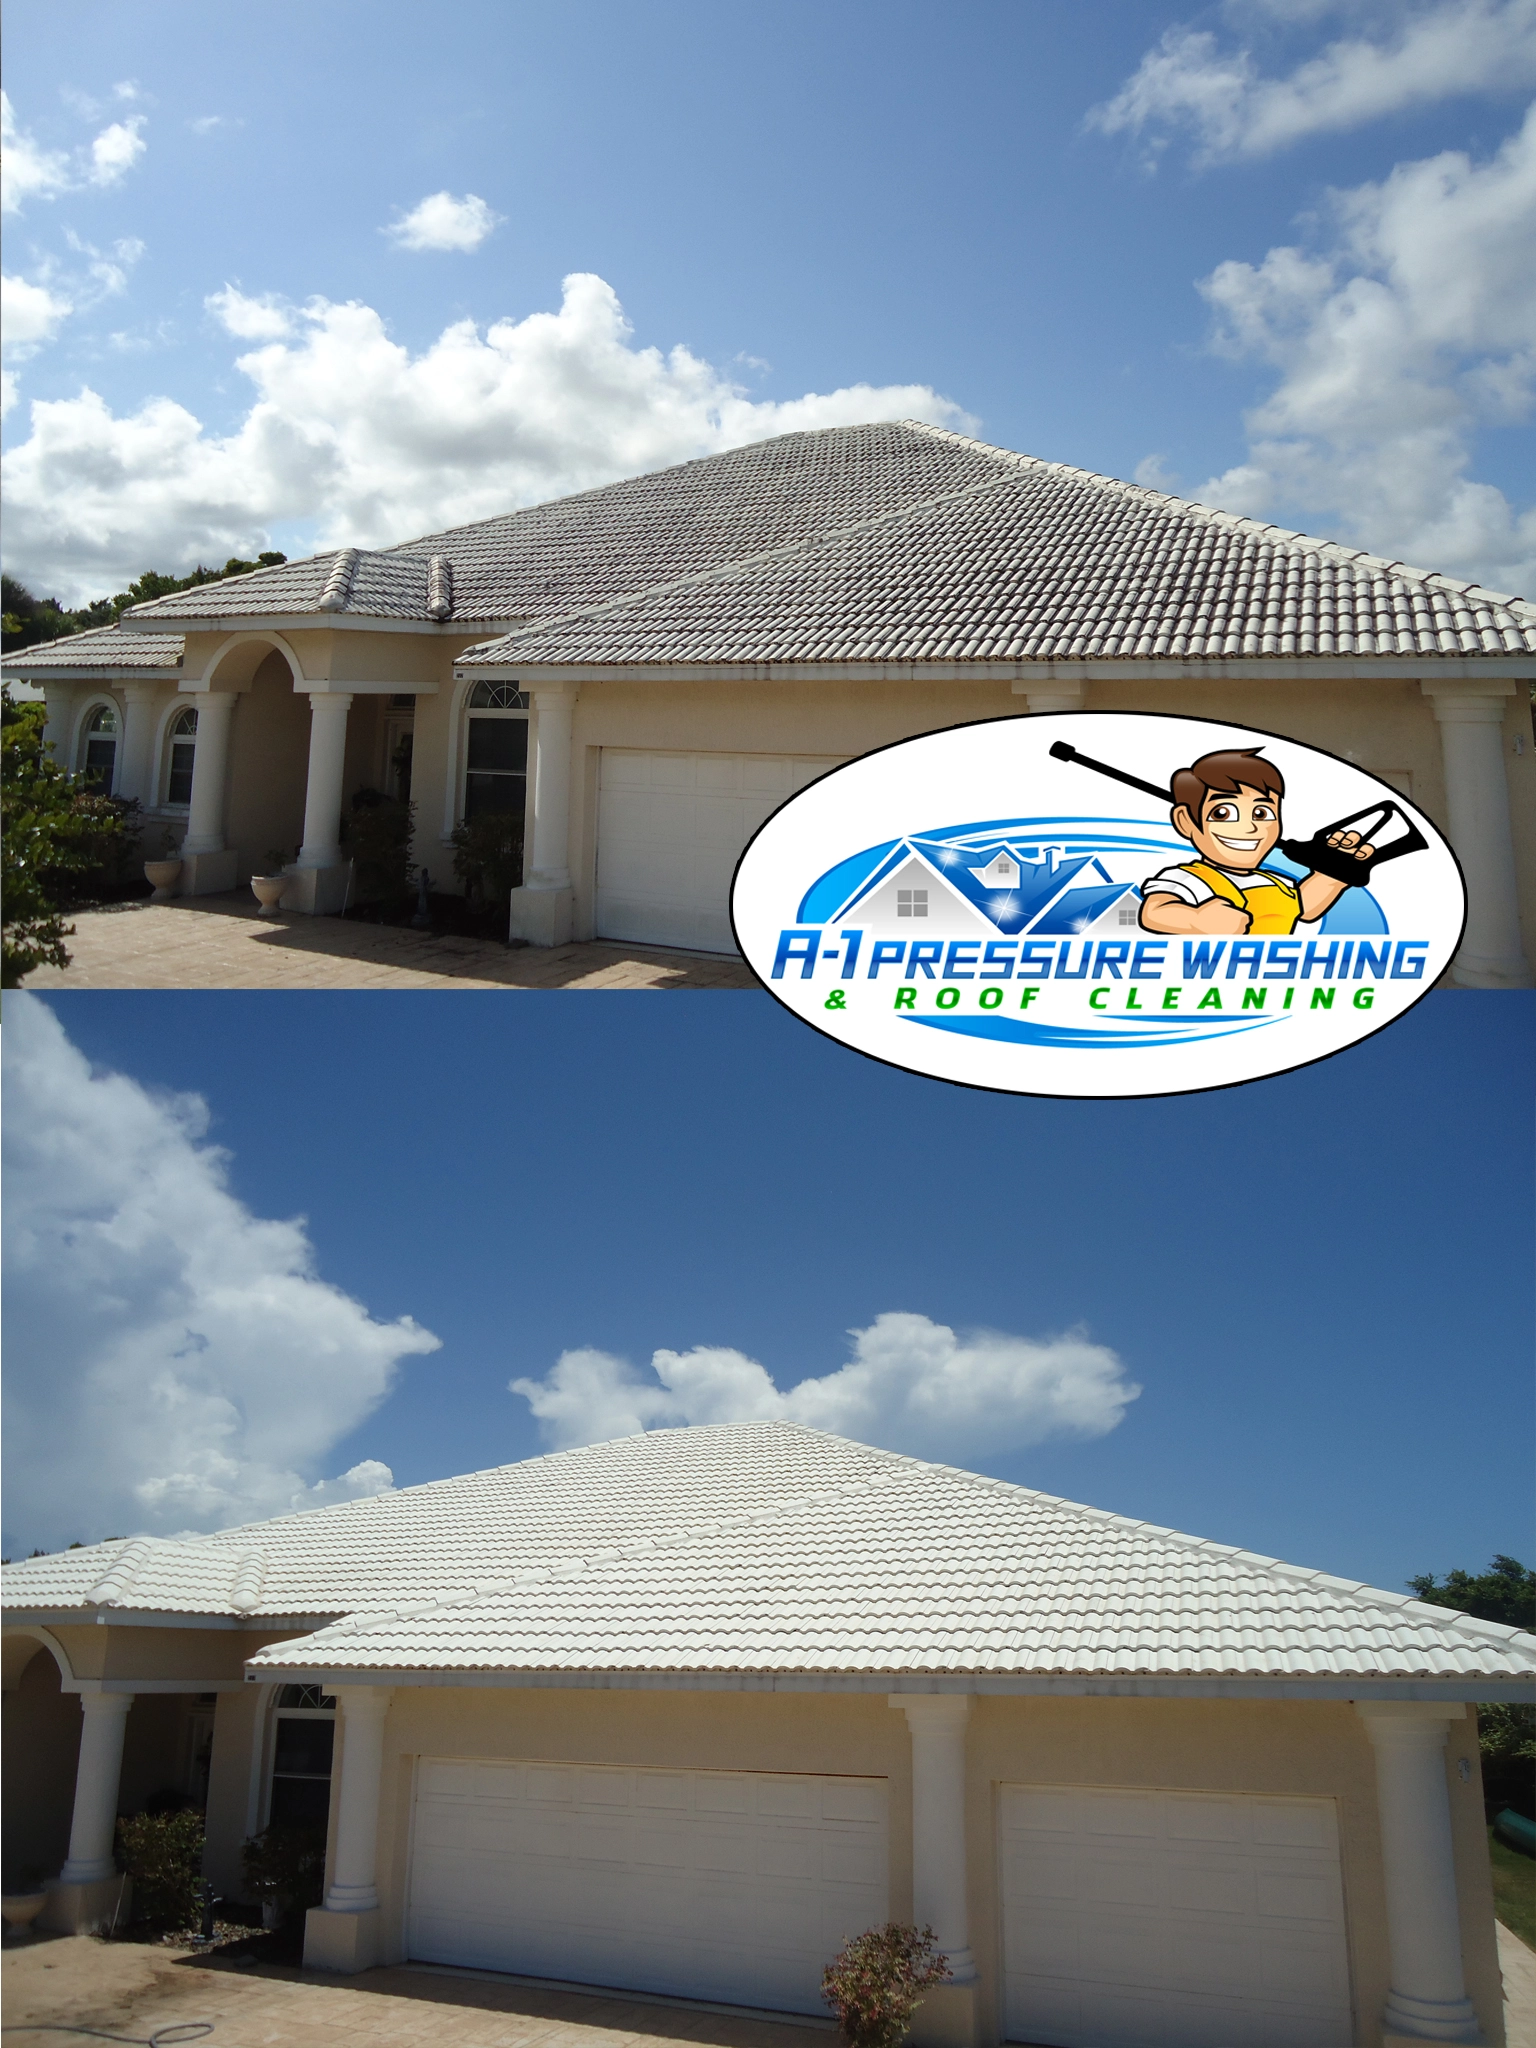 White Tile Roof Cleaning | A-1 Pressure Washing & Roof Cleaning | 941-815-8454 